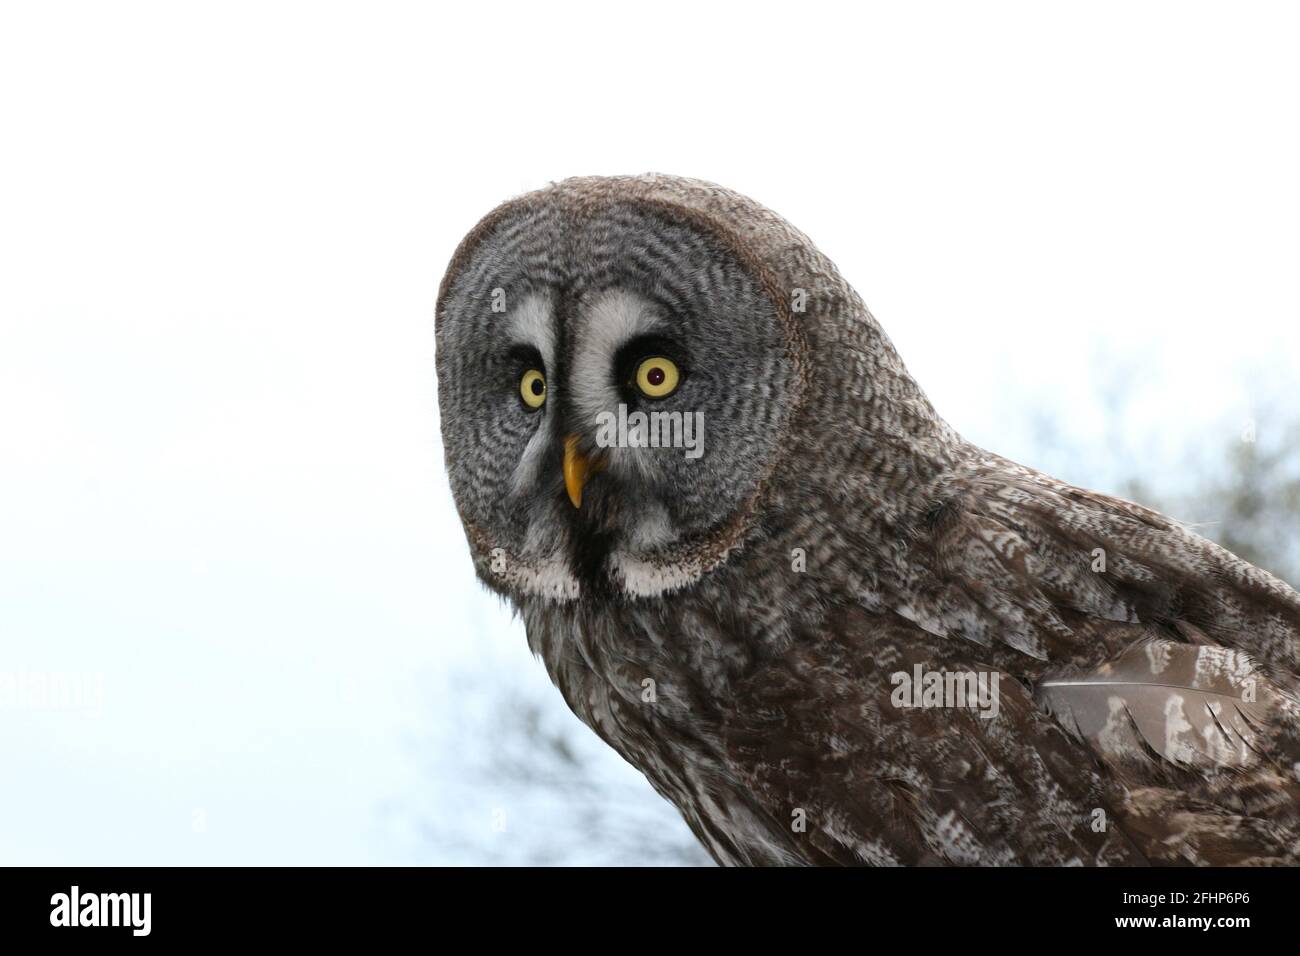 The Owls (Strigiformes) are an order of birds Stock Photo